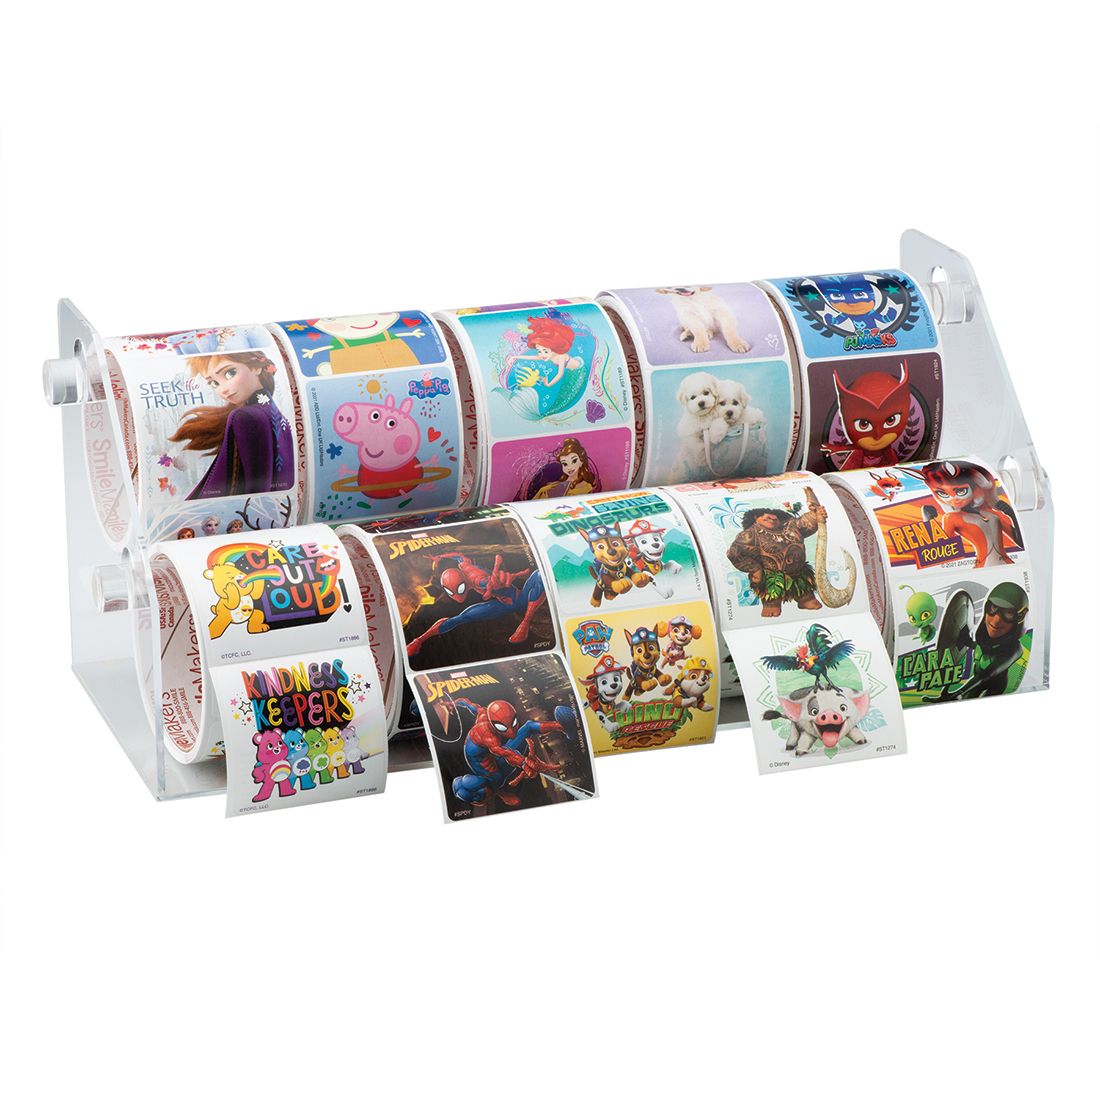 10 Roll Sticker Rack - Office Supplies from SmileMakers